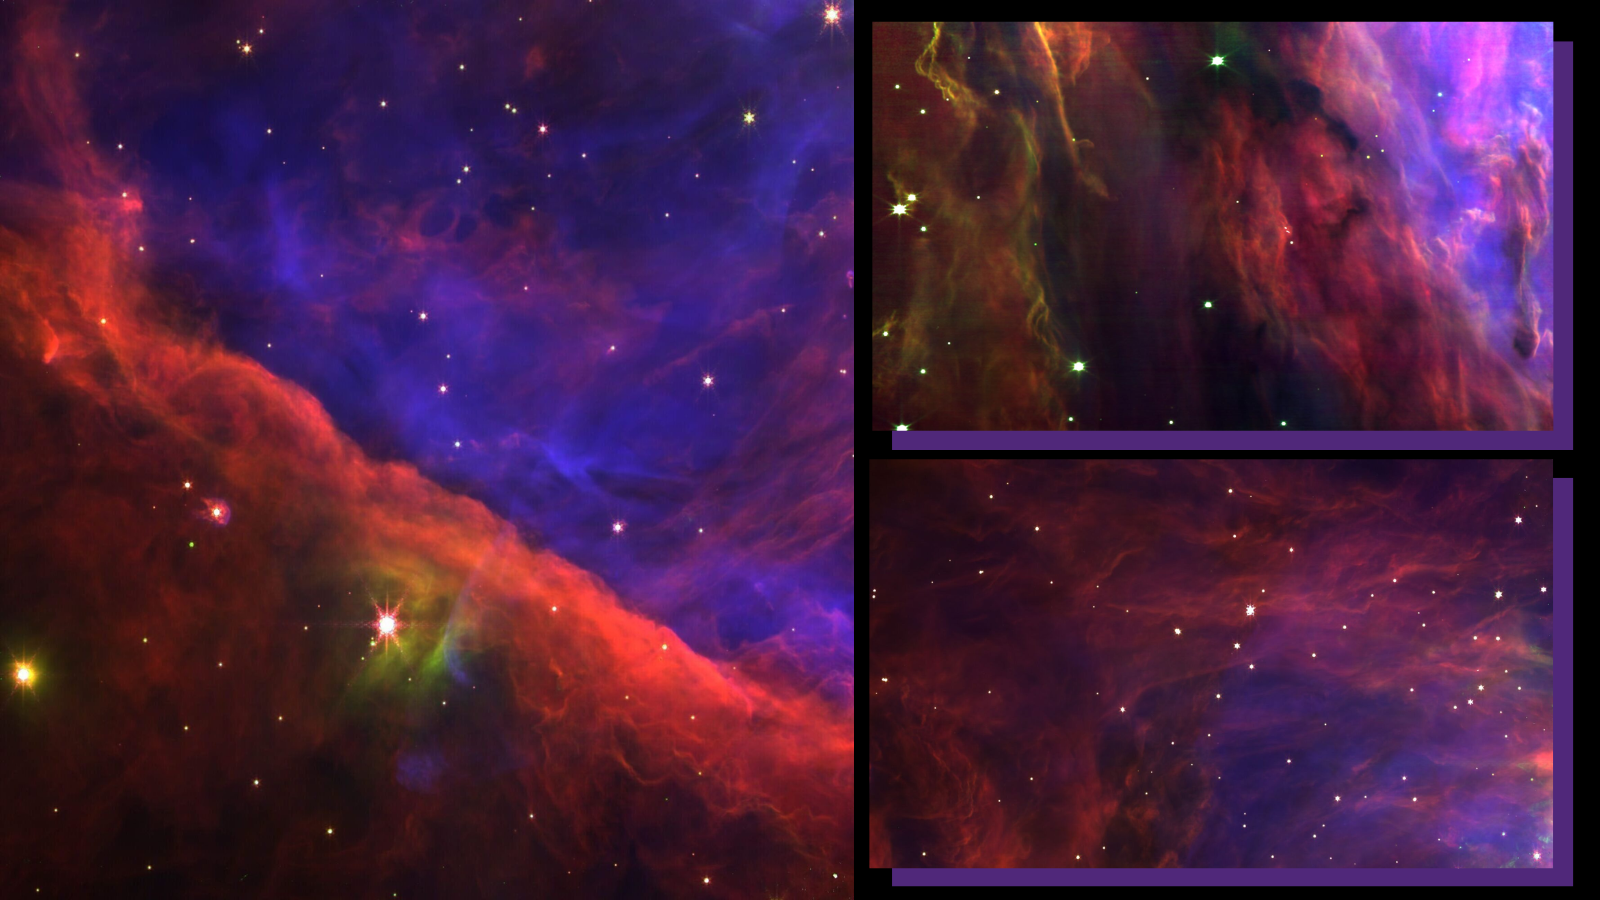 James Webb Space Telescope sees Orion Nebula in a stunning new light (images) Space